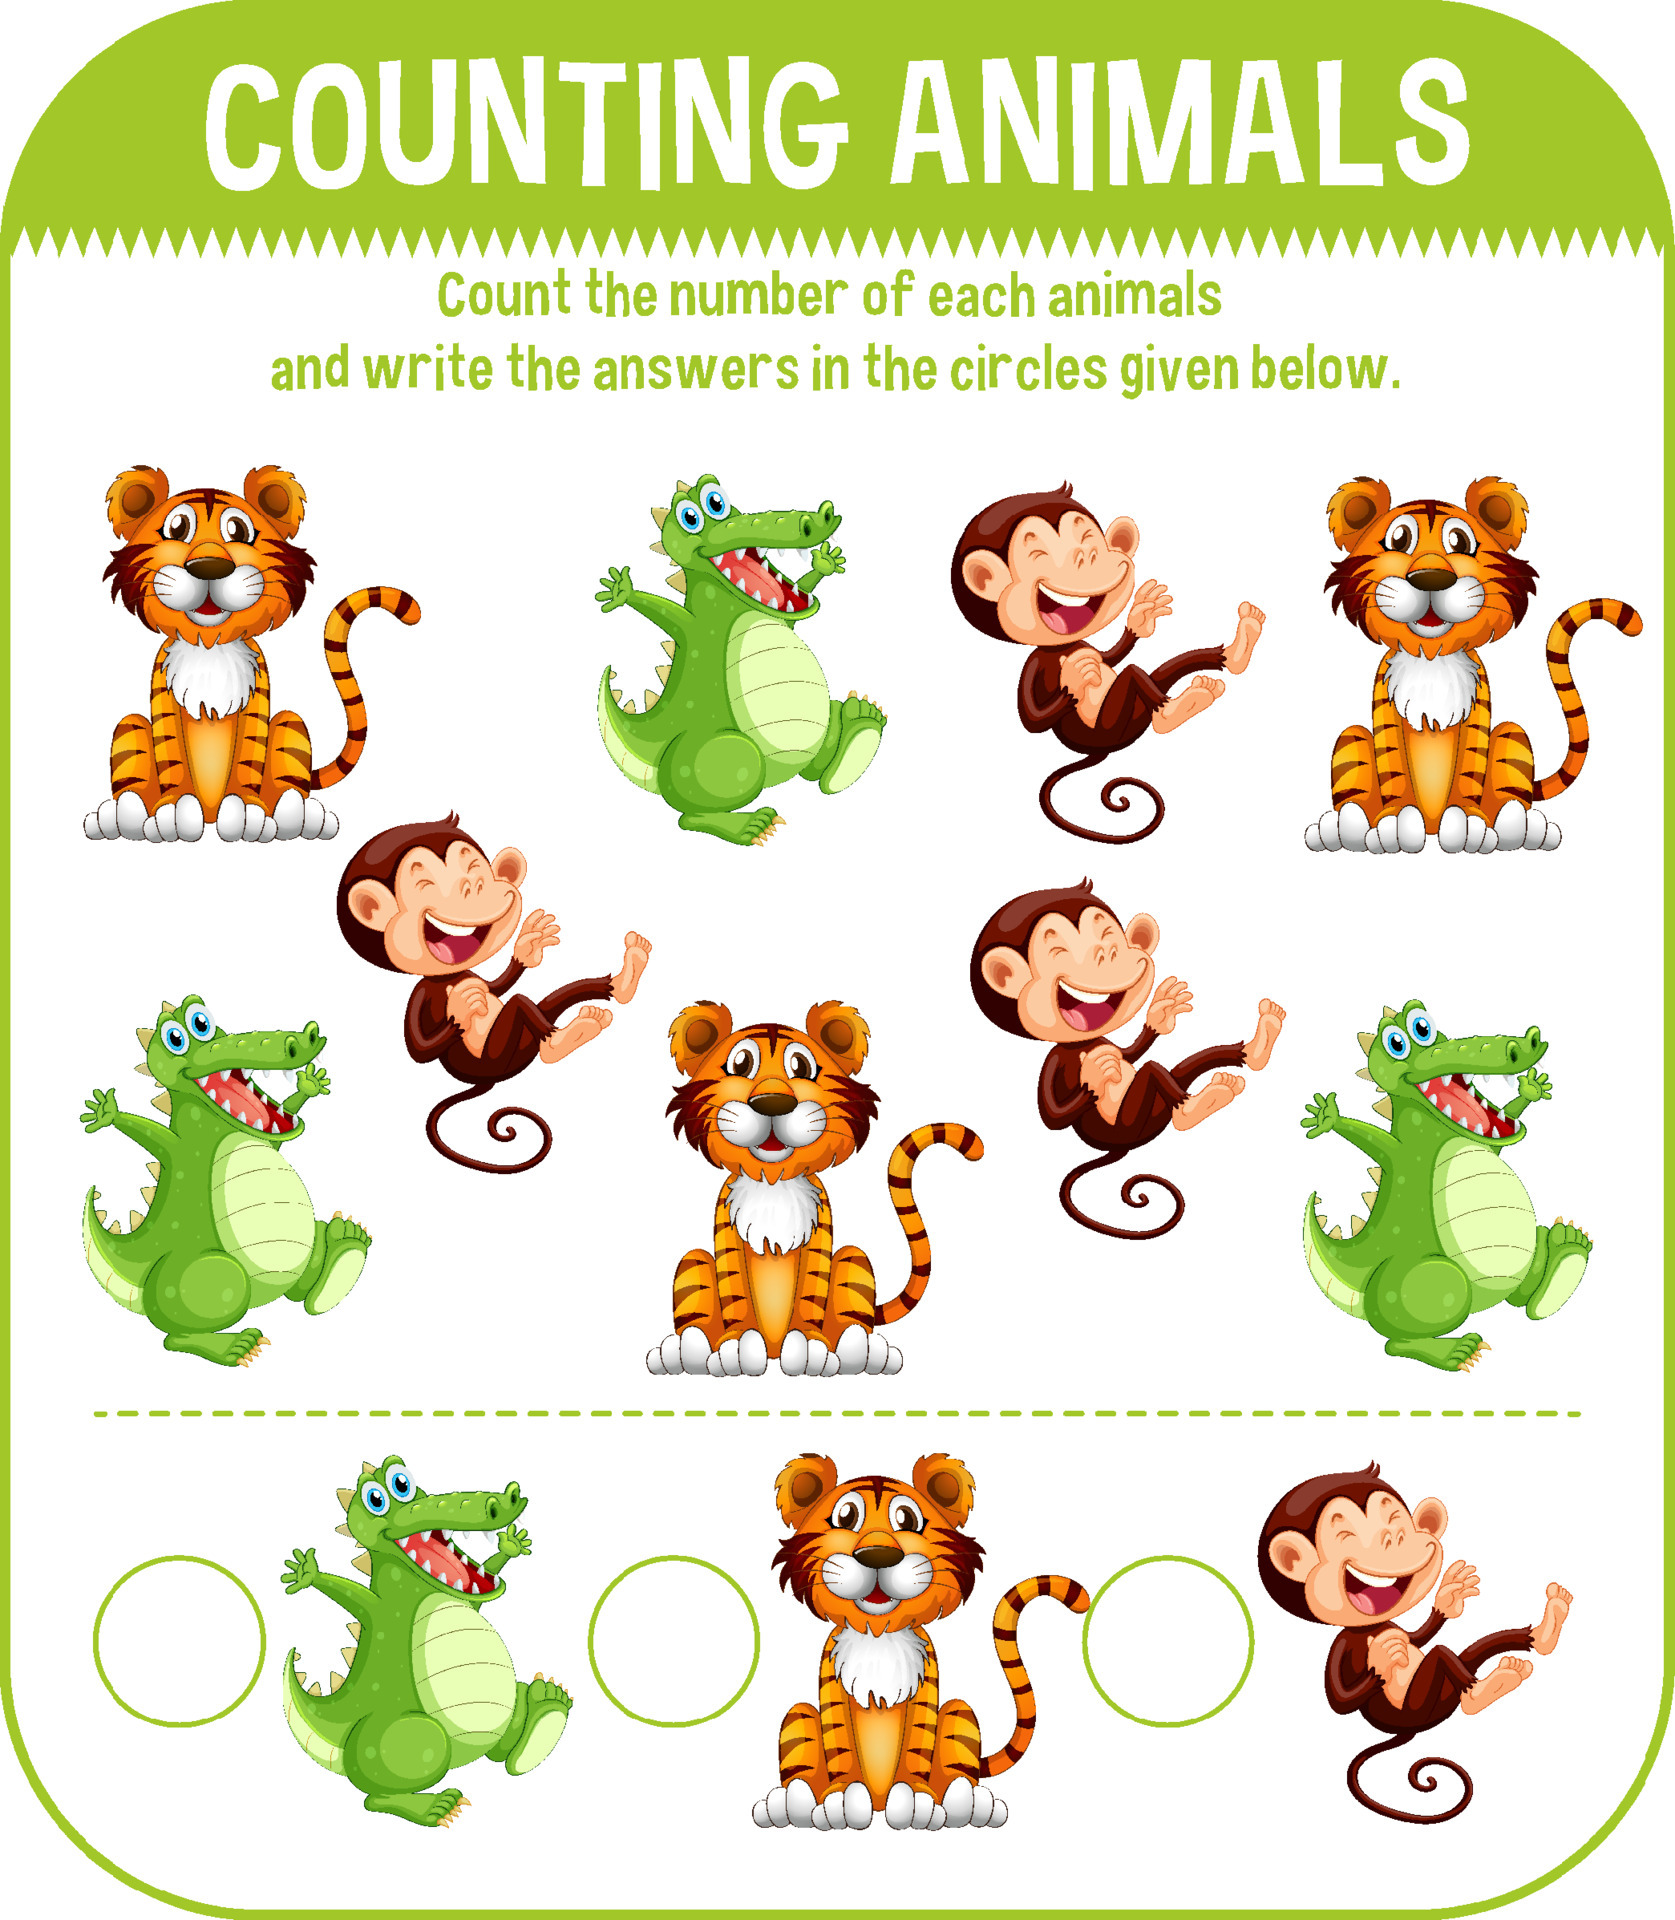 Worksheet design for counting animals 7092615 Vector Art at Vecteezy